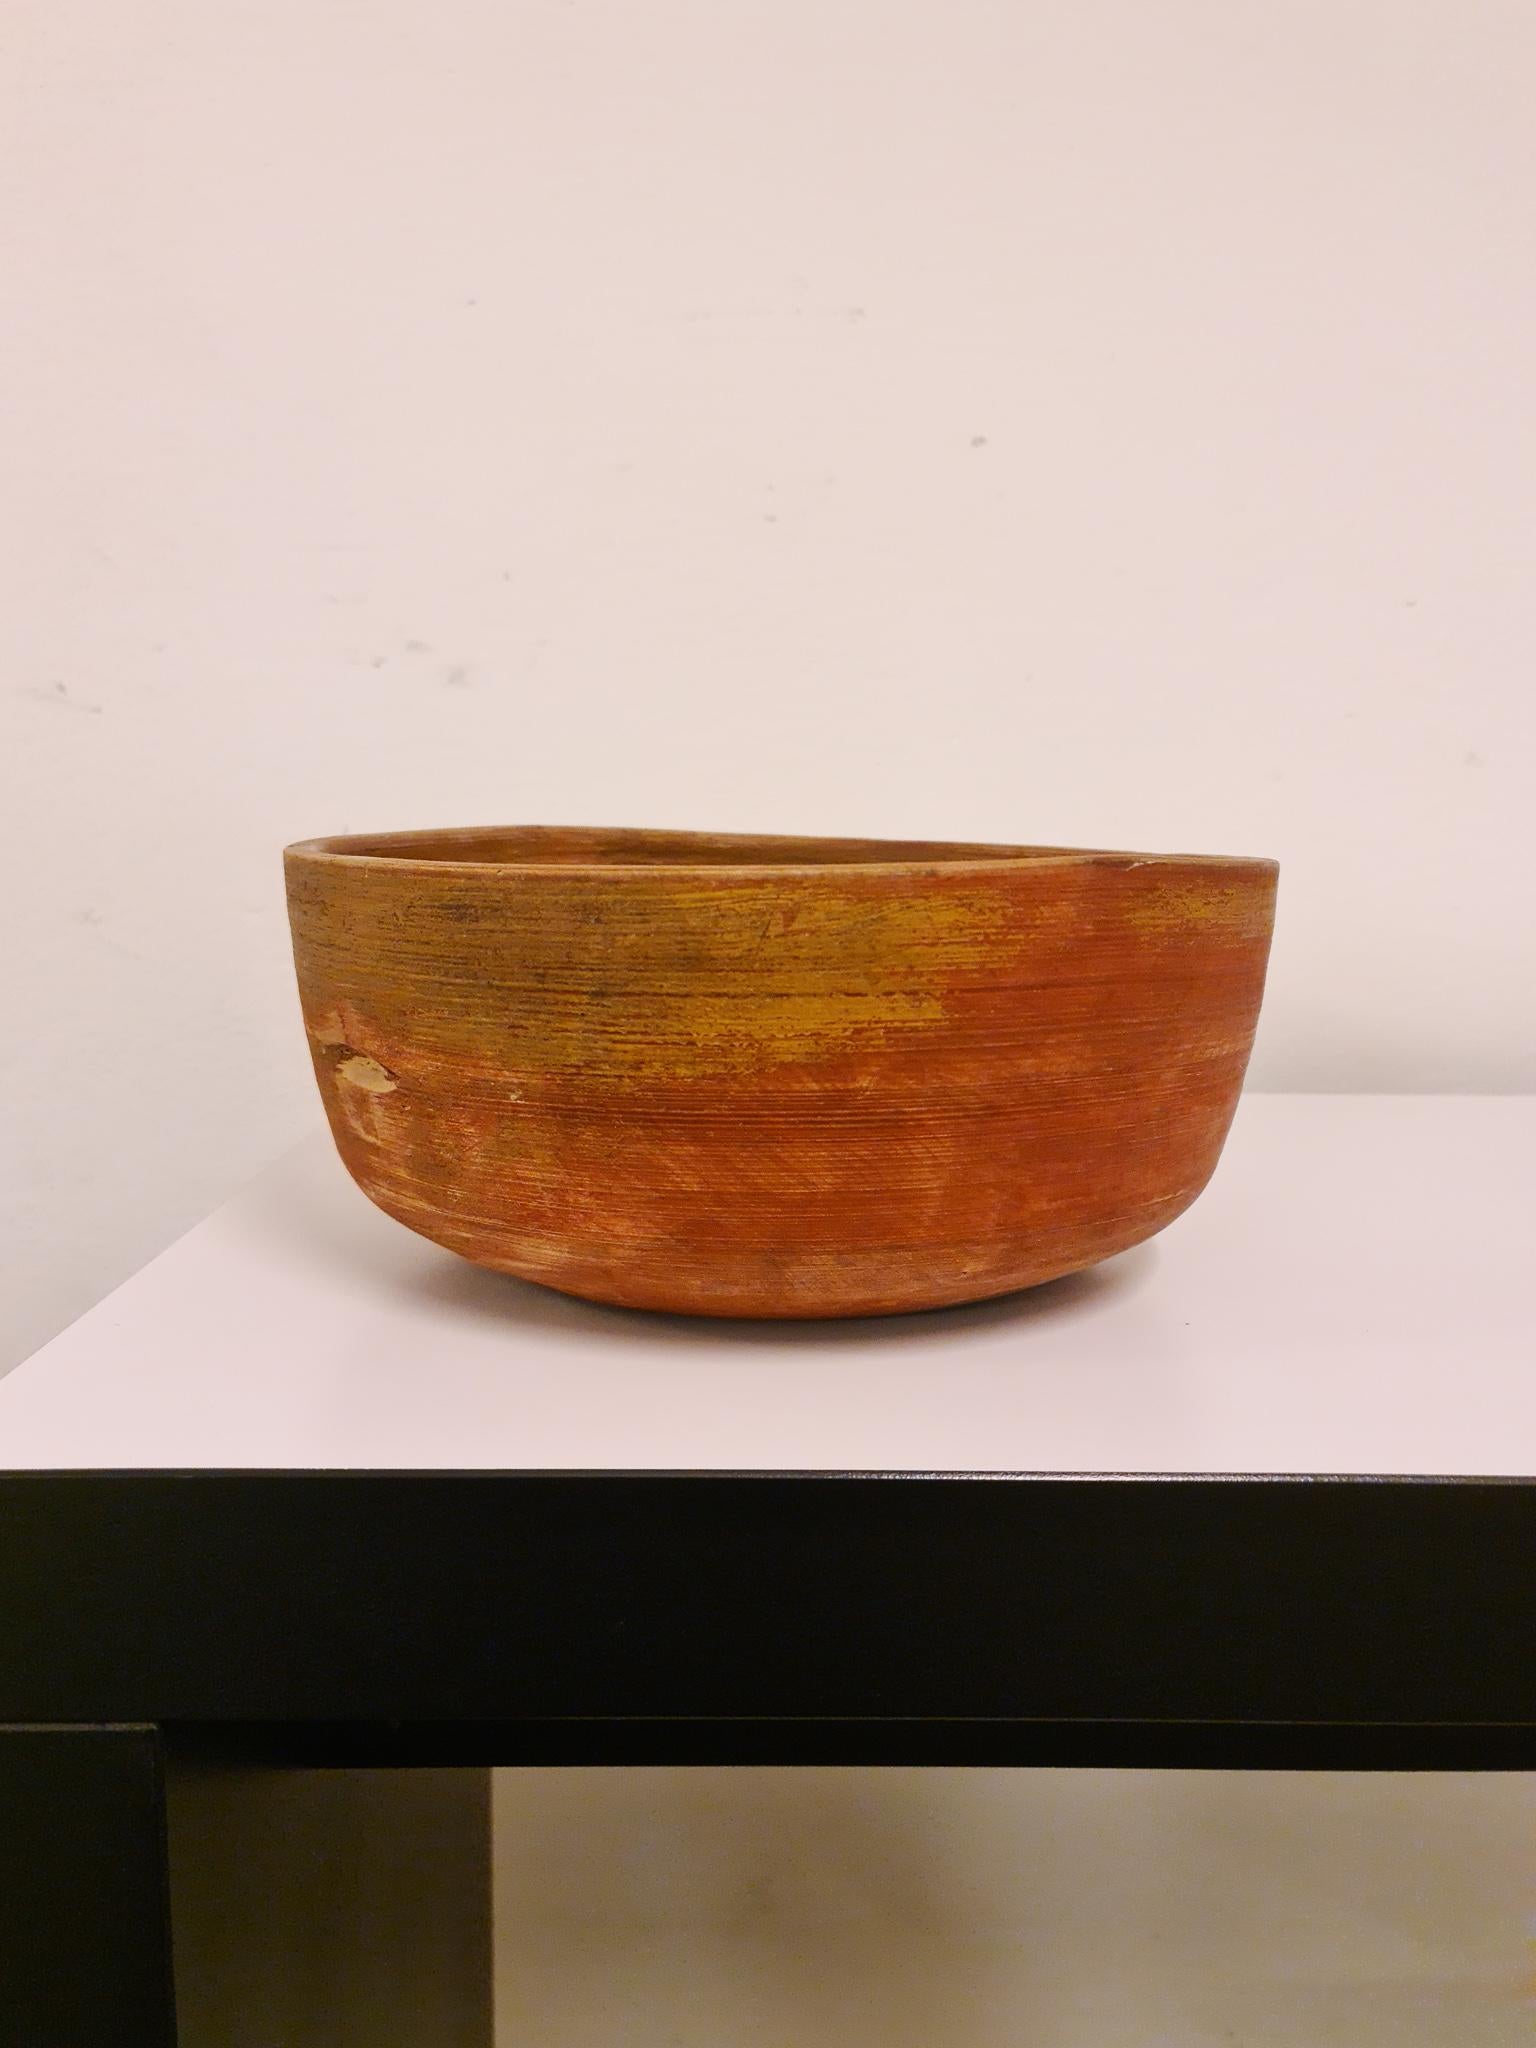 An antique and unique organic wooden bowl. With highly appealing patina, faded painting on the bowl makes this a unique and desirable piece. Produced in Sweden, early 19th century. 
These bowls where especially important for many families;